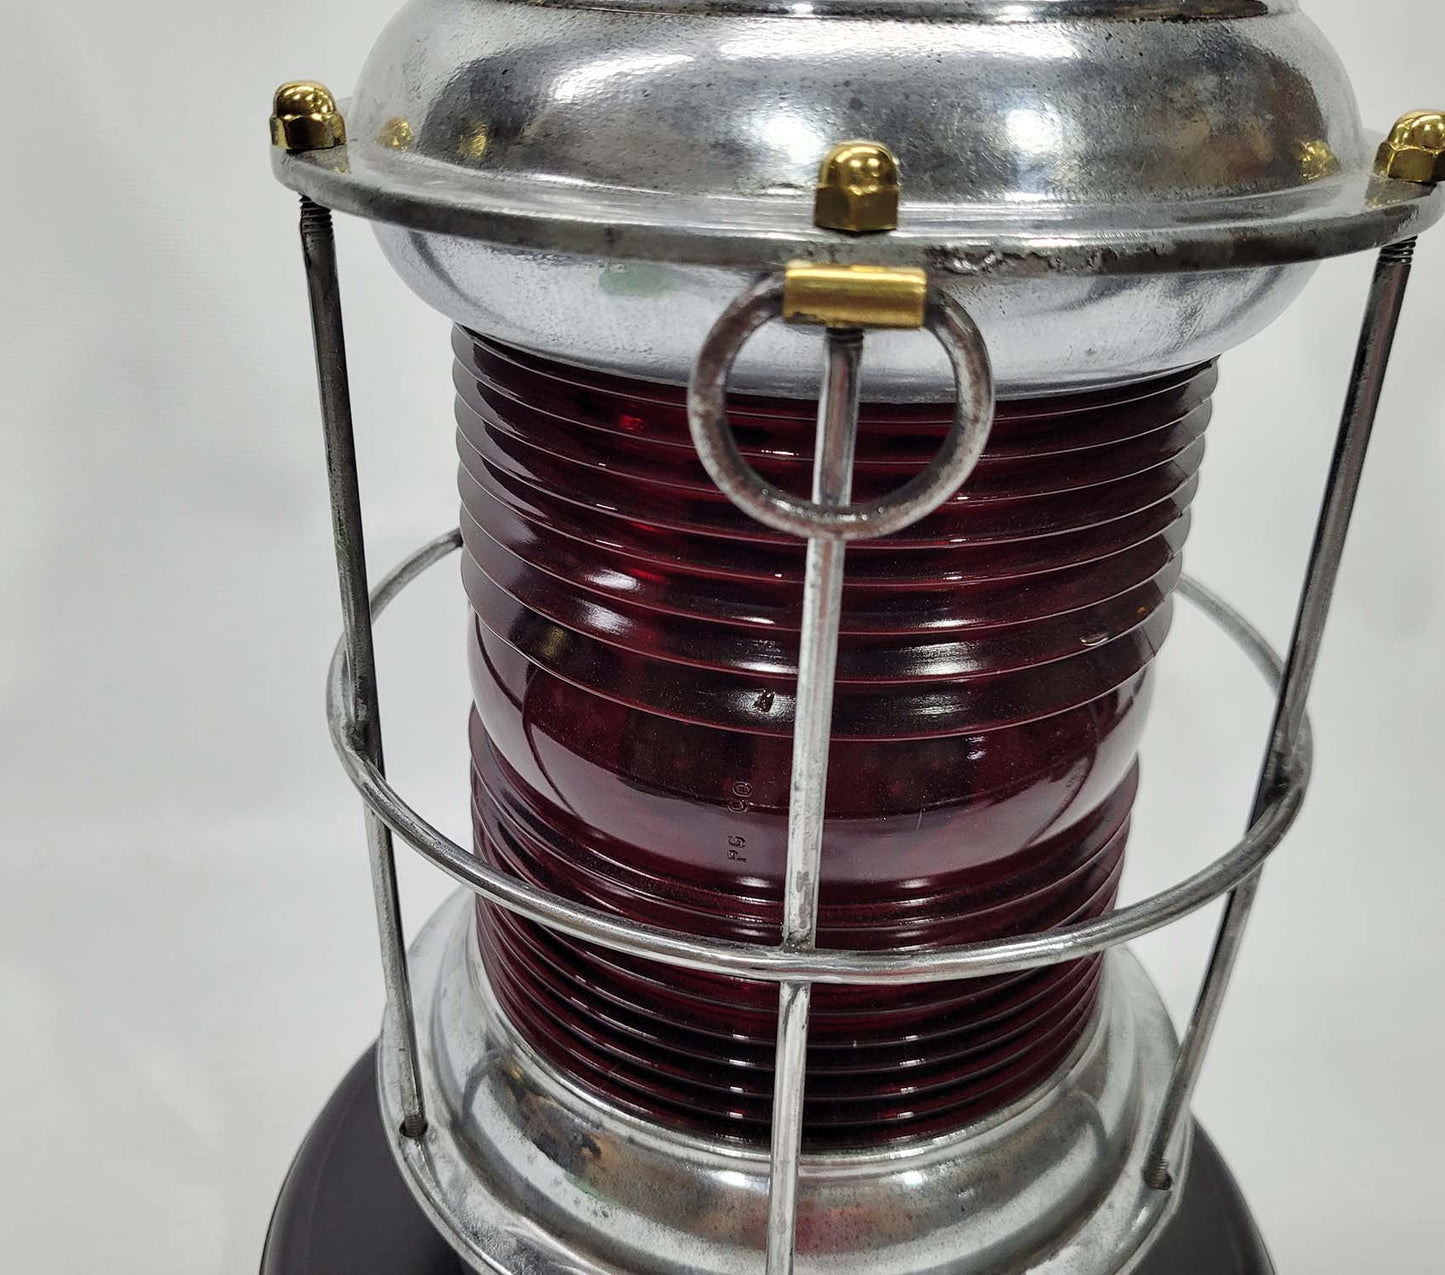 Polished Steel Ships Lantern with Ruby Red Lens - Lannan Gallery